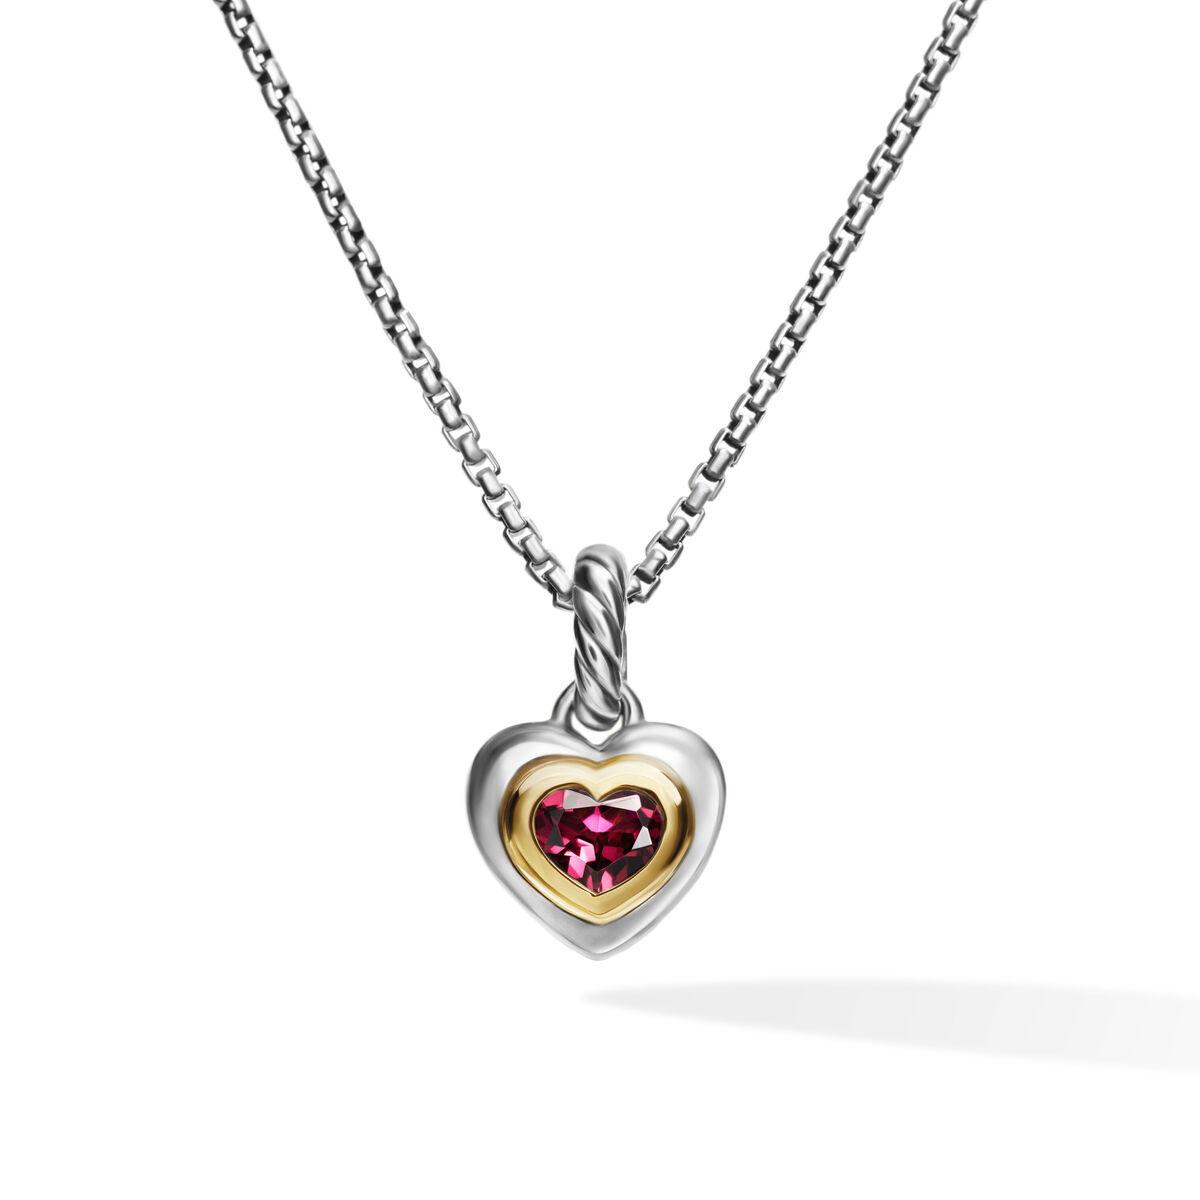 David Yurman Petite Cable Heart Pendant Necklace in Sterling Silver and 14K Yellow Gold with Rhodolite Garnet 0